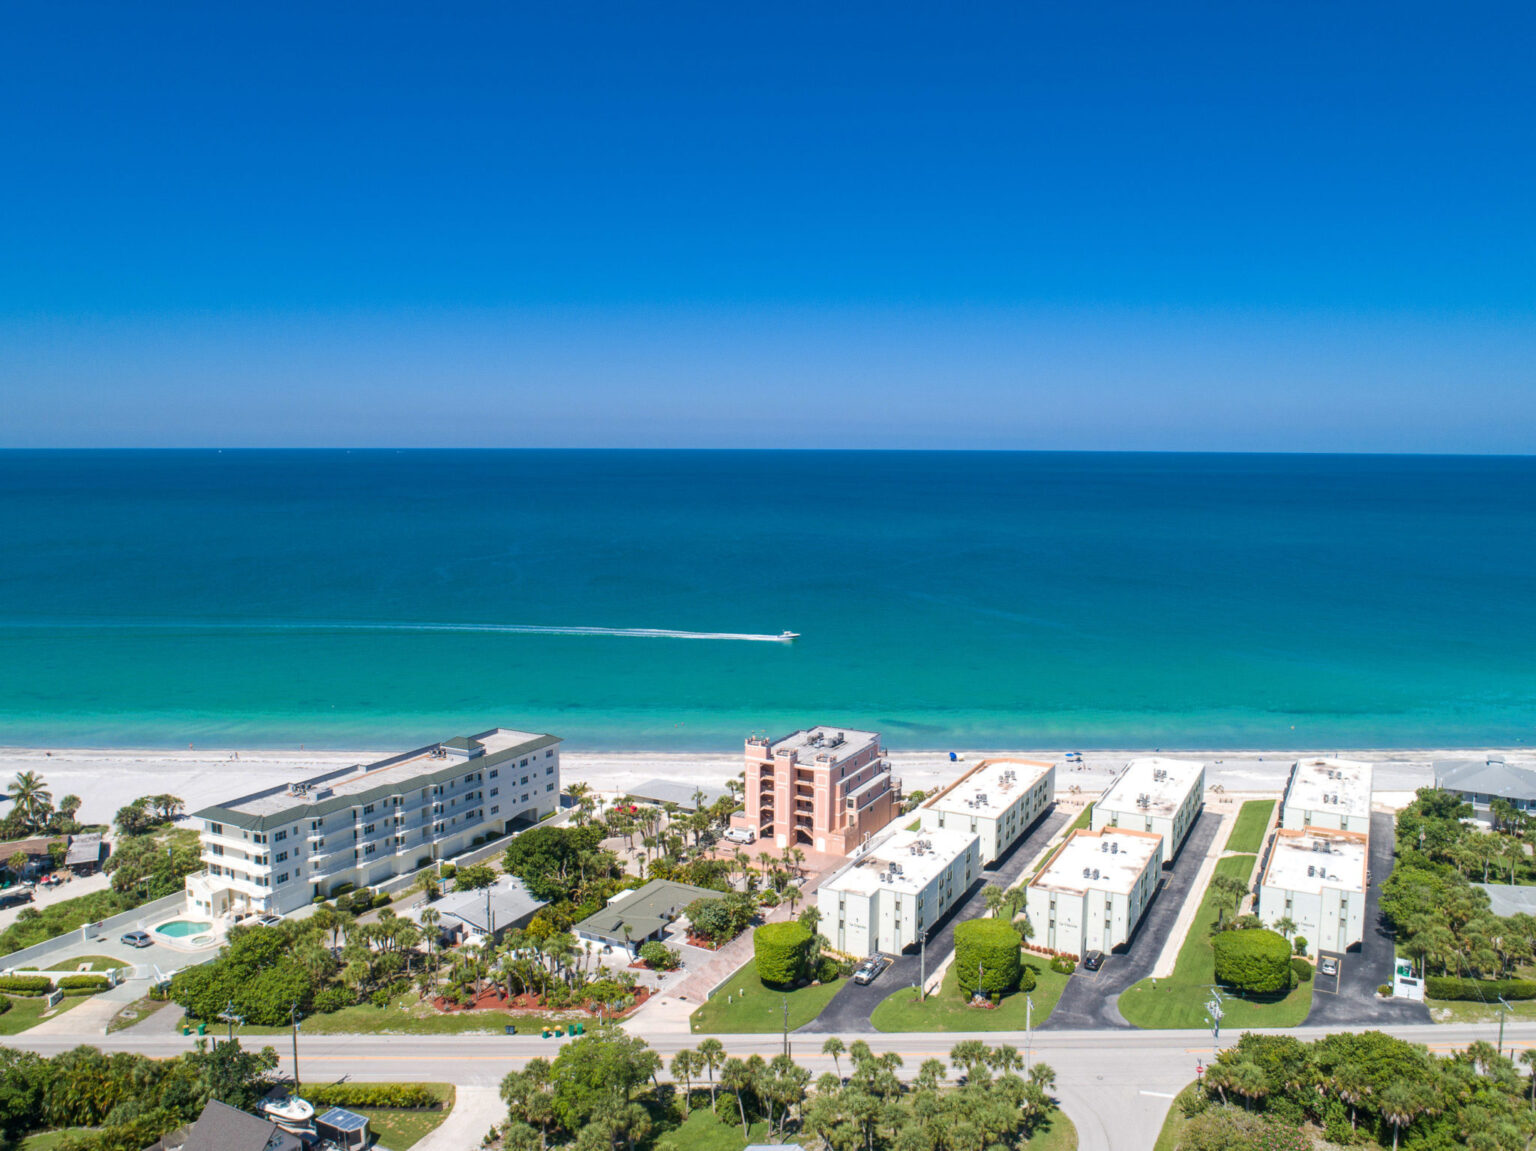 aerial view of La Coquina condo buildings with beach in background